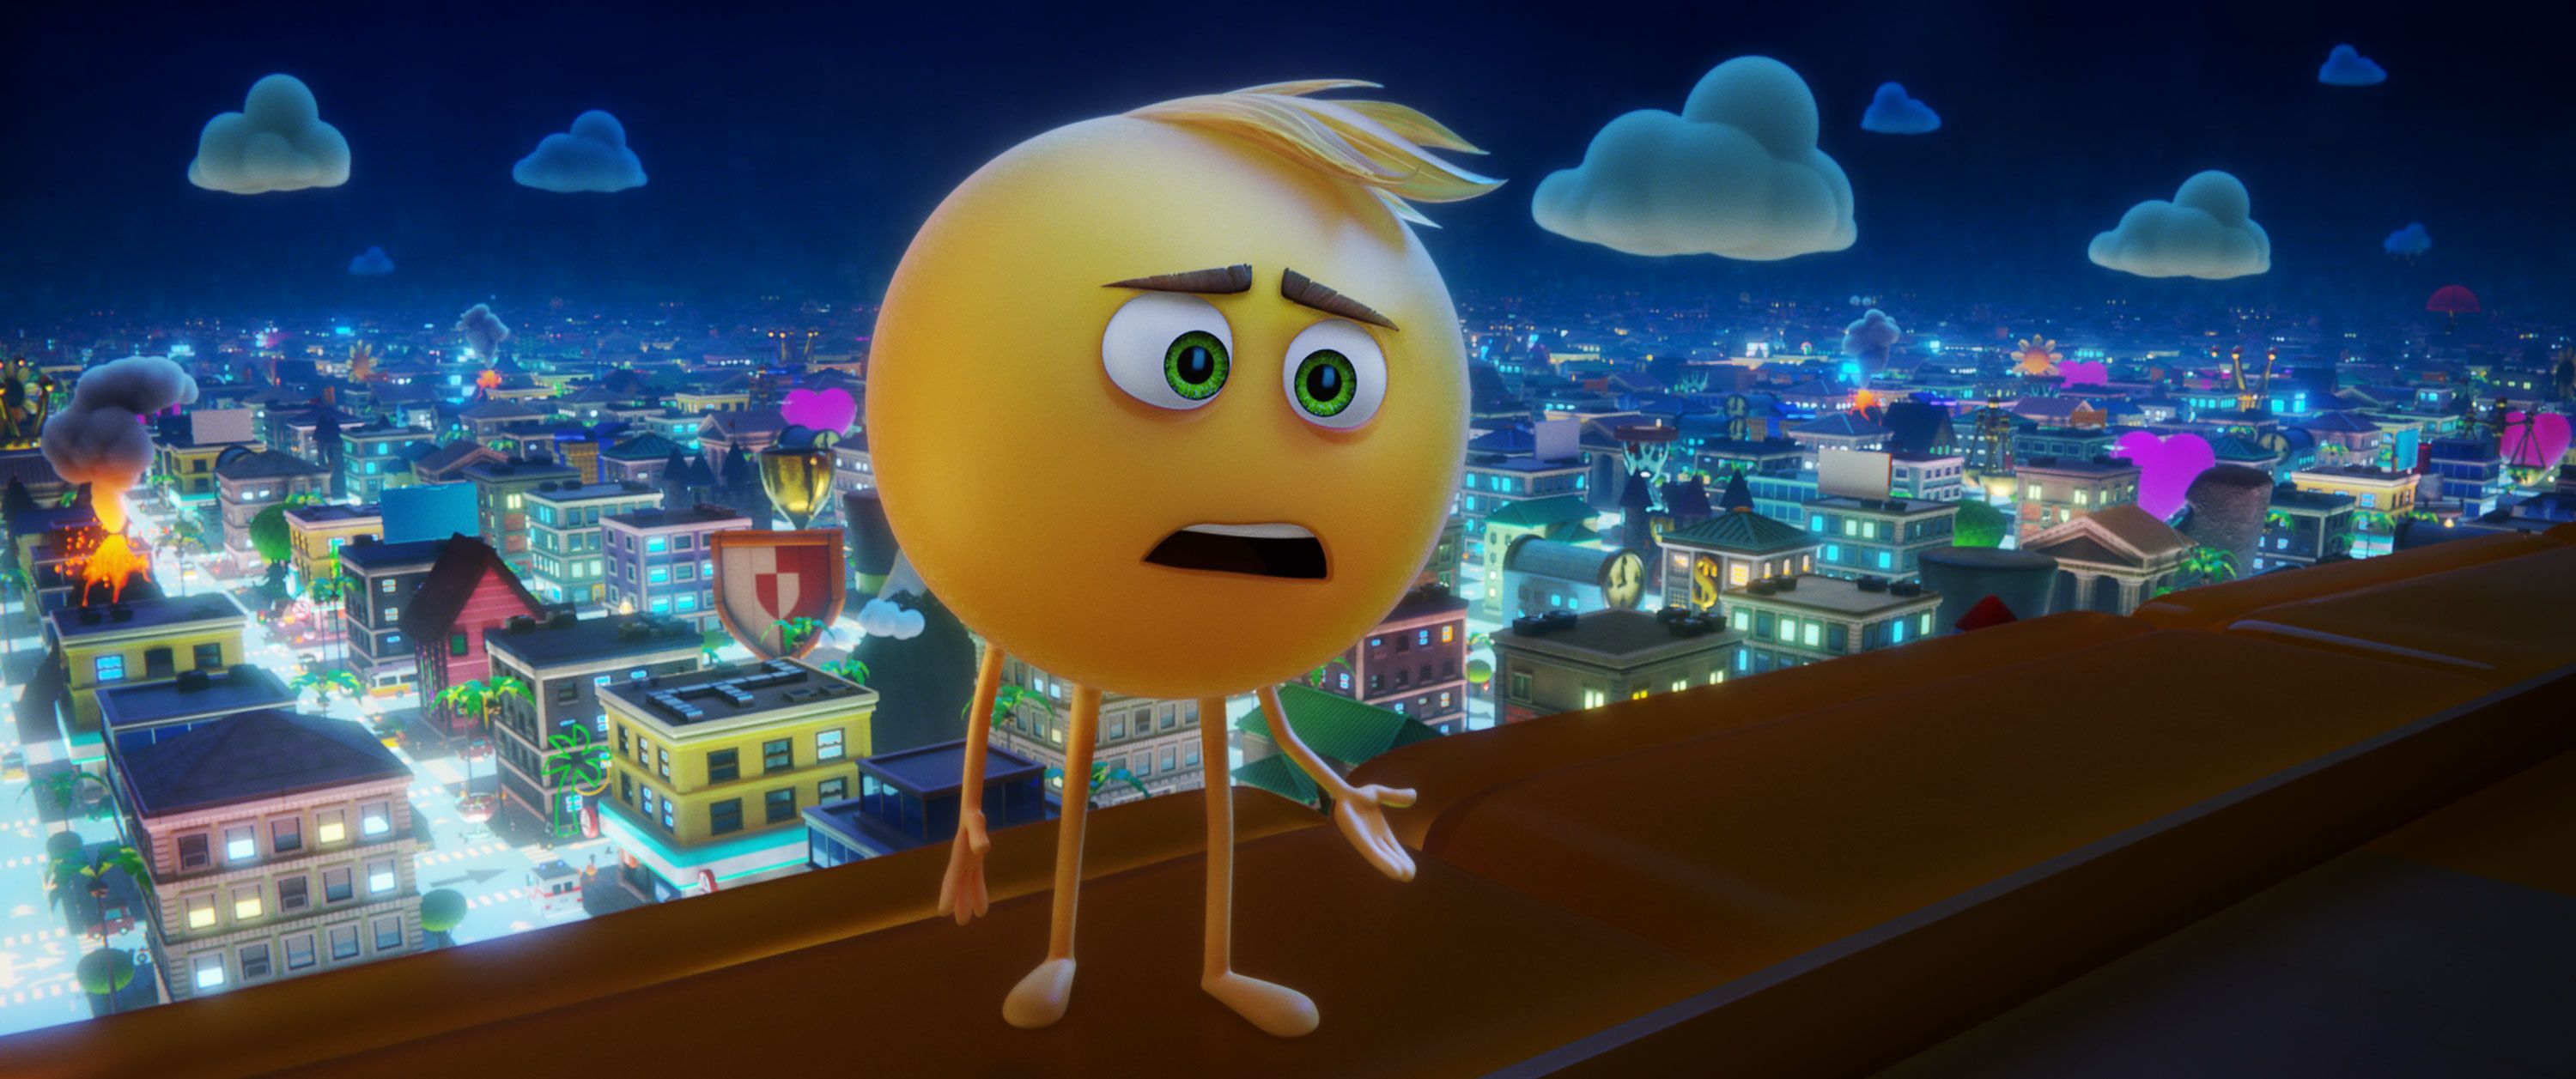 17 Of The Most Disturbing Moments In The Emoji Movie